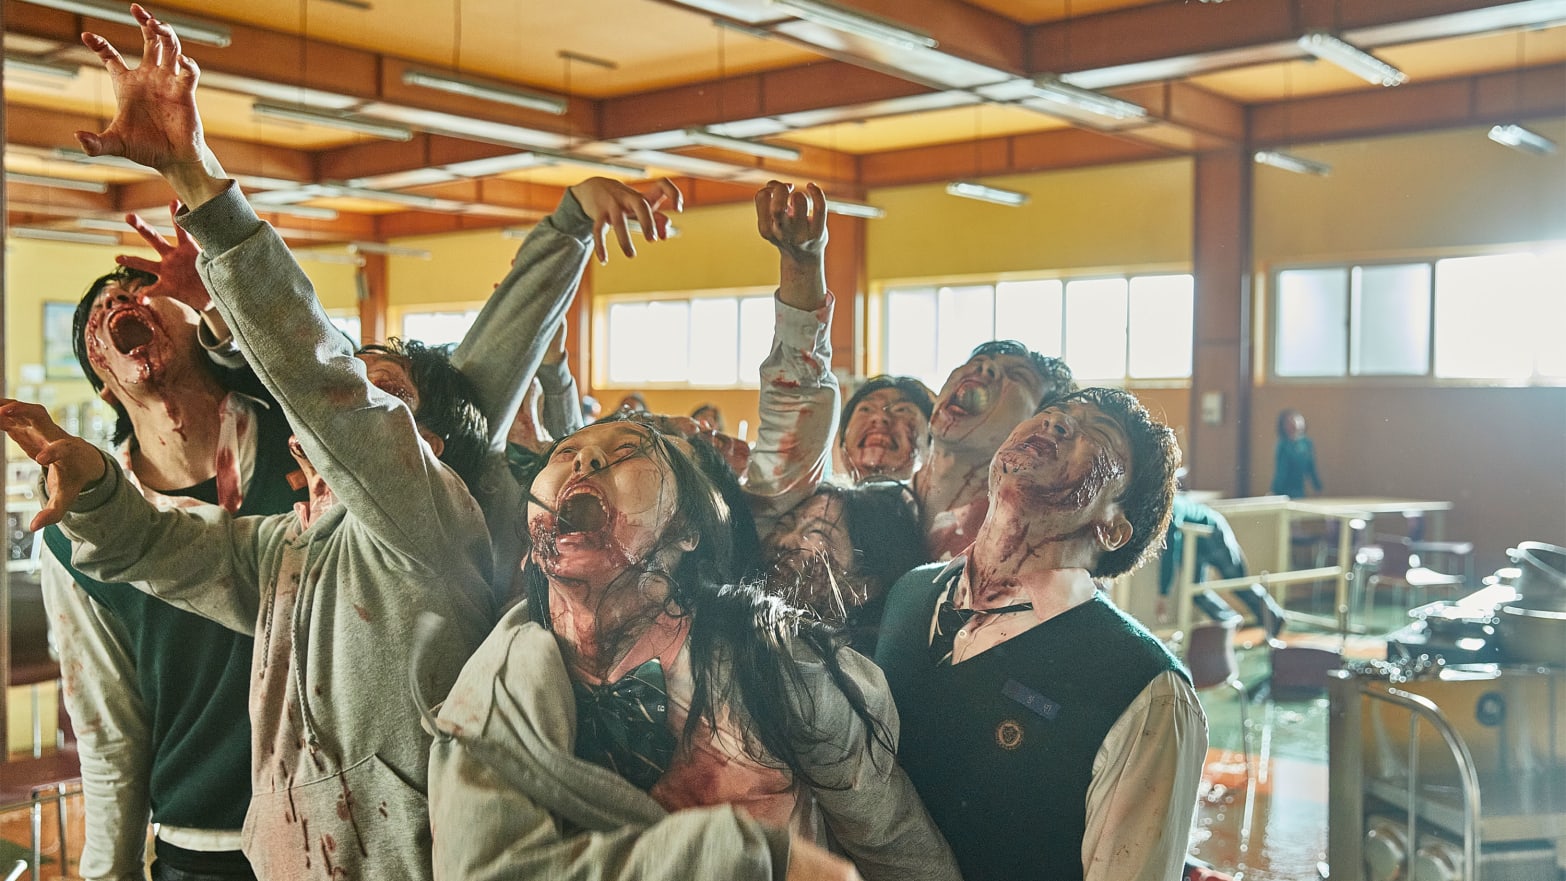 Netflix's “All of Us Are Dead” is the new high school horror